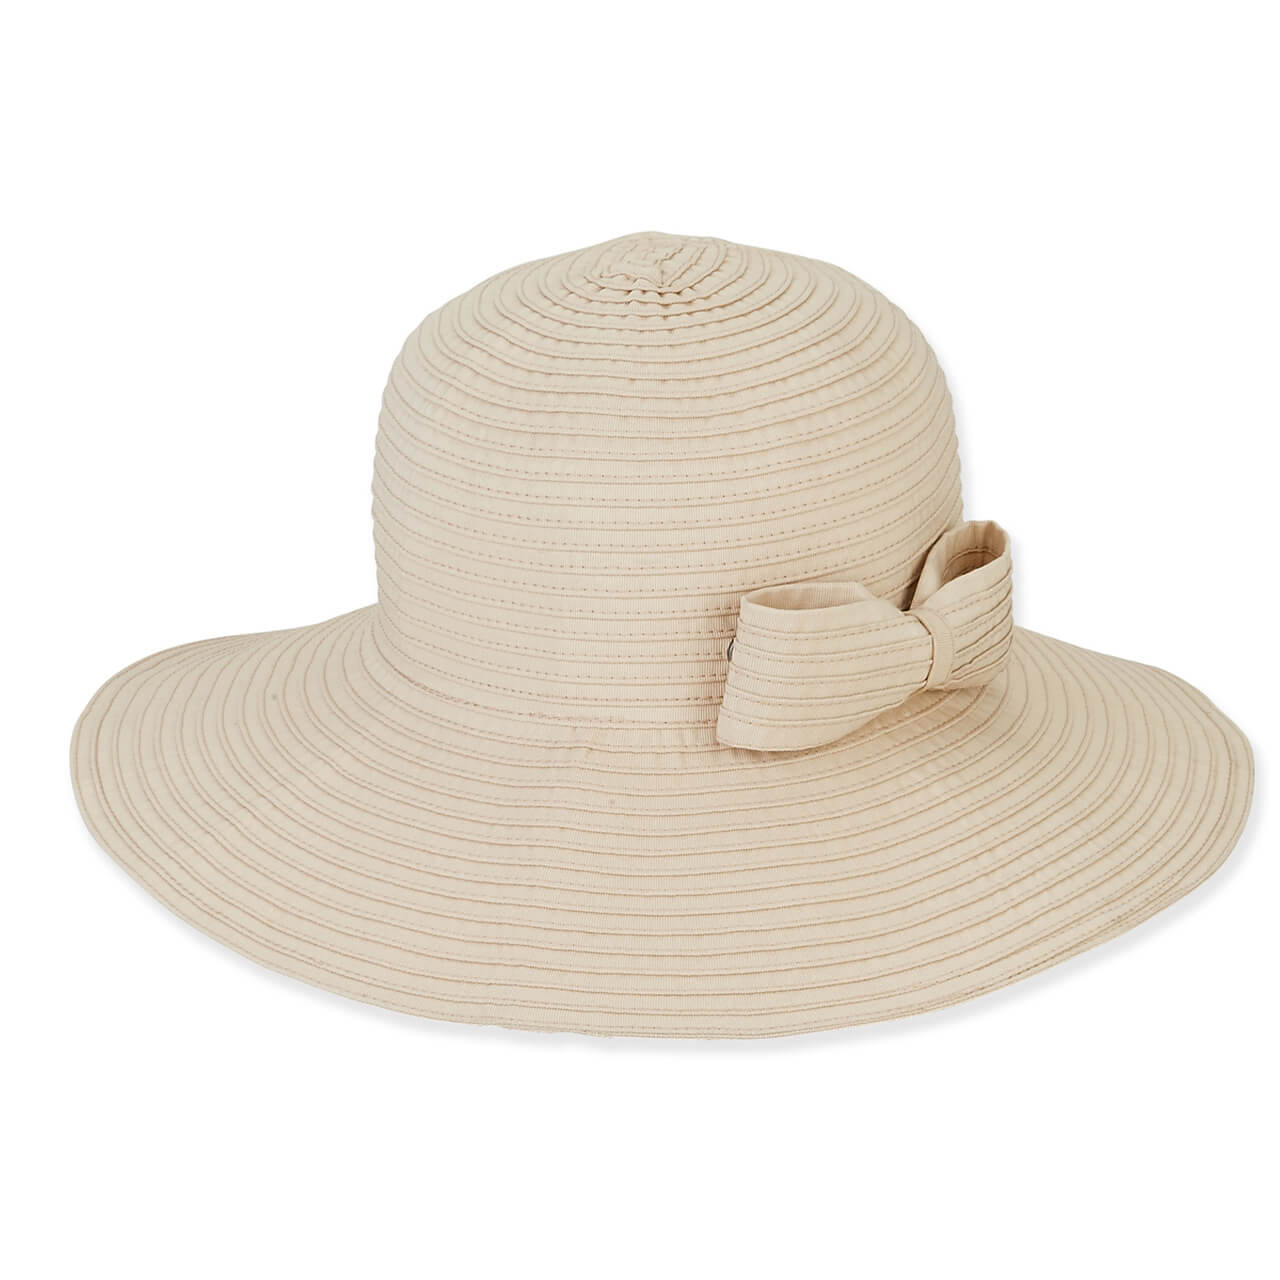 A wide brimmed, wire ribbed, lightweight sun hat. Perfect for the pool or packed for your next trip.